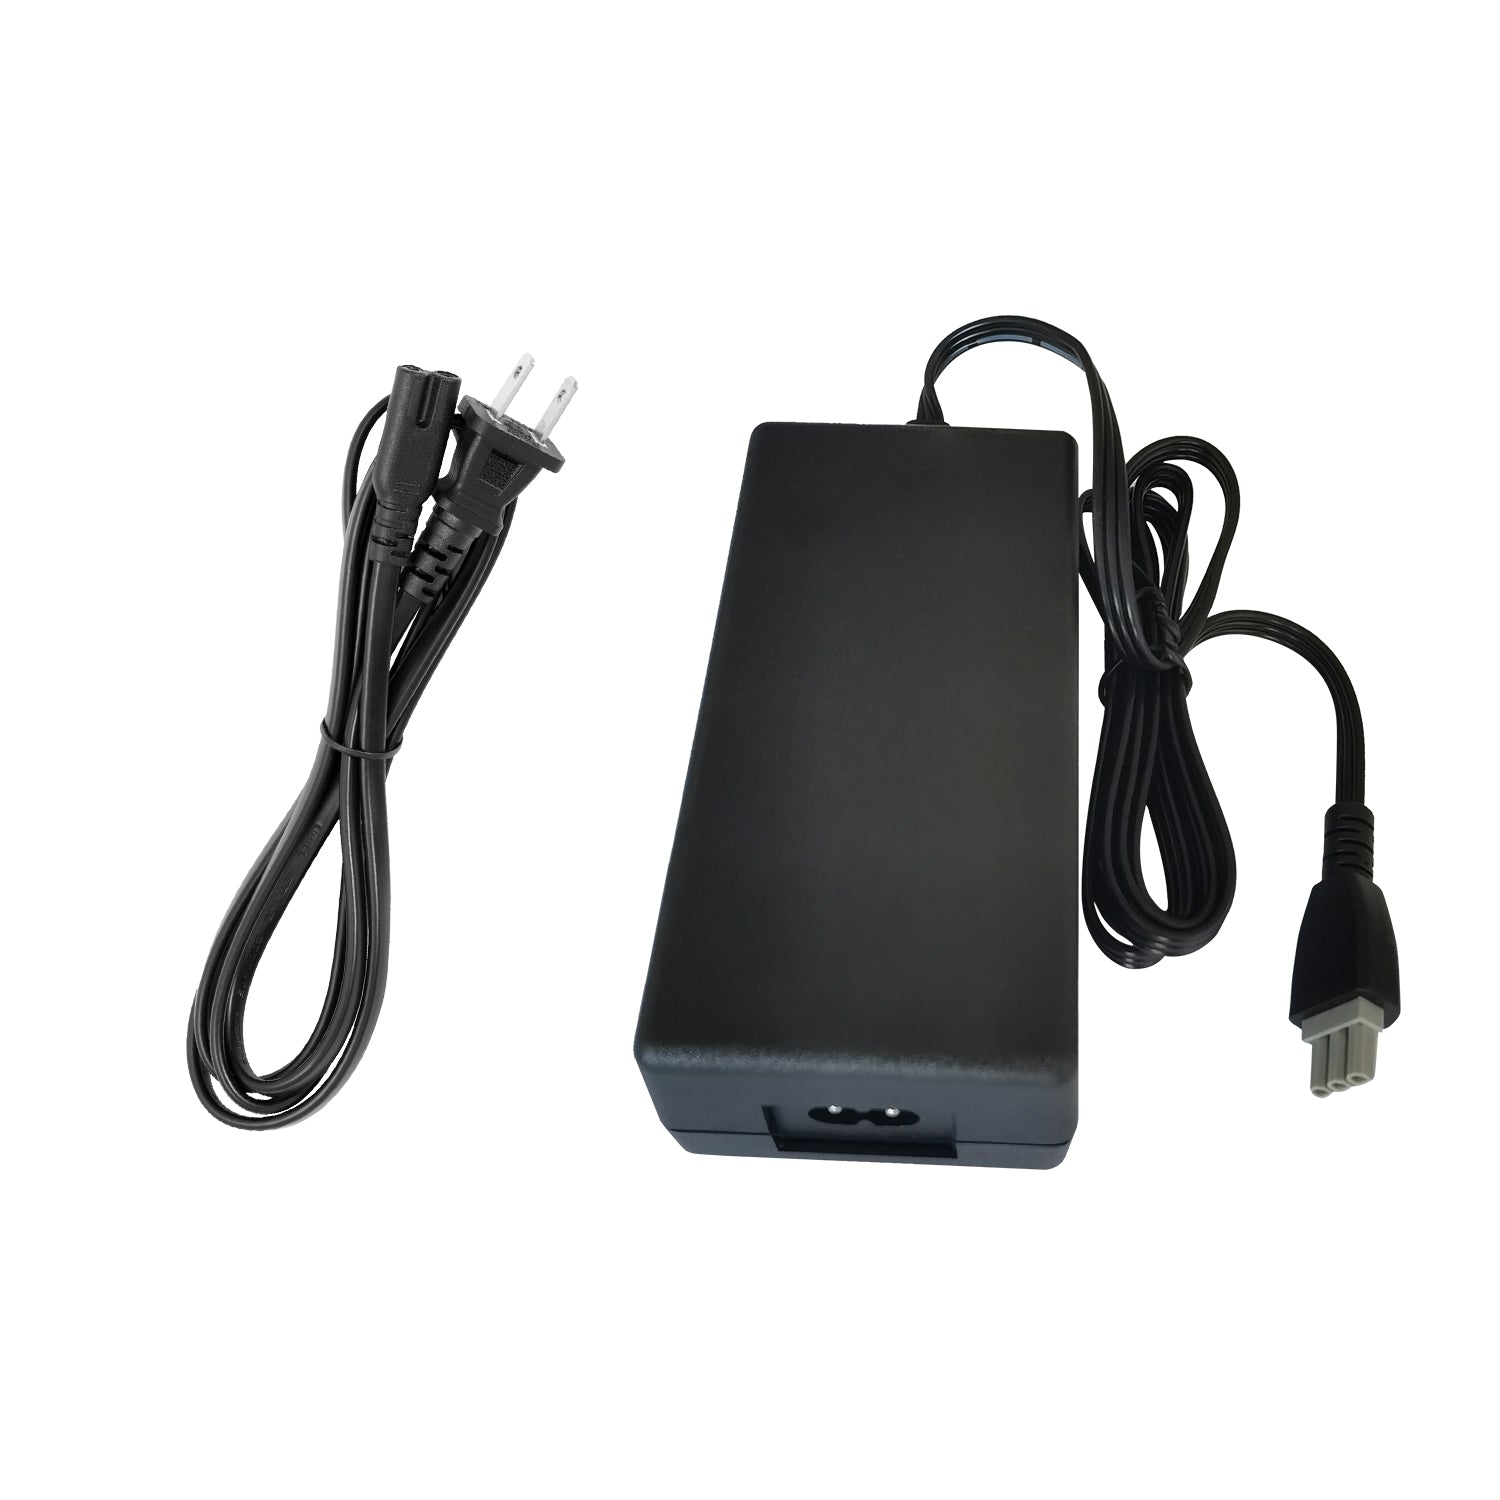 Power Adapter for hp psc 1406 Printer.